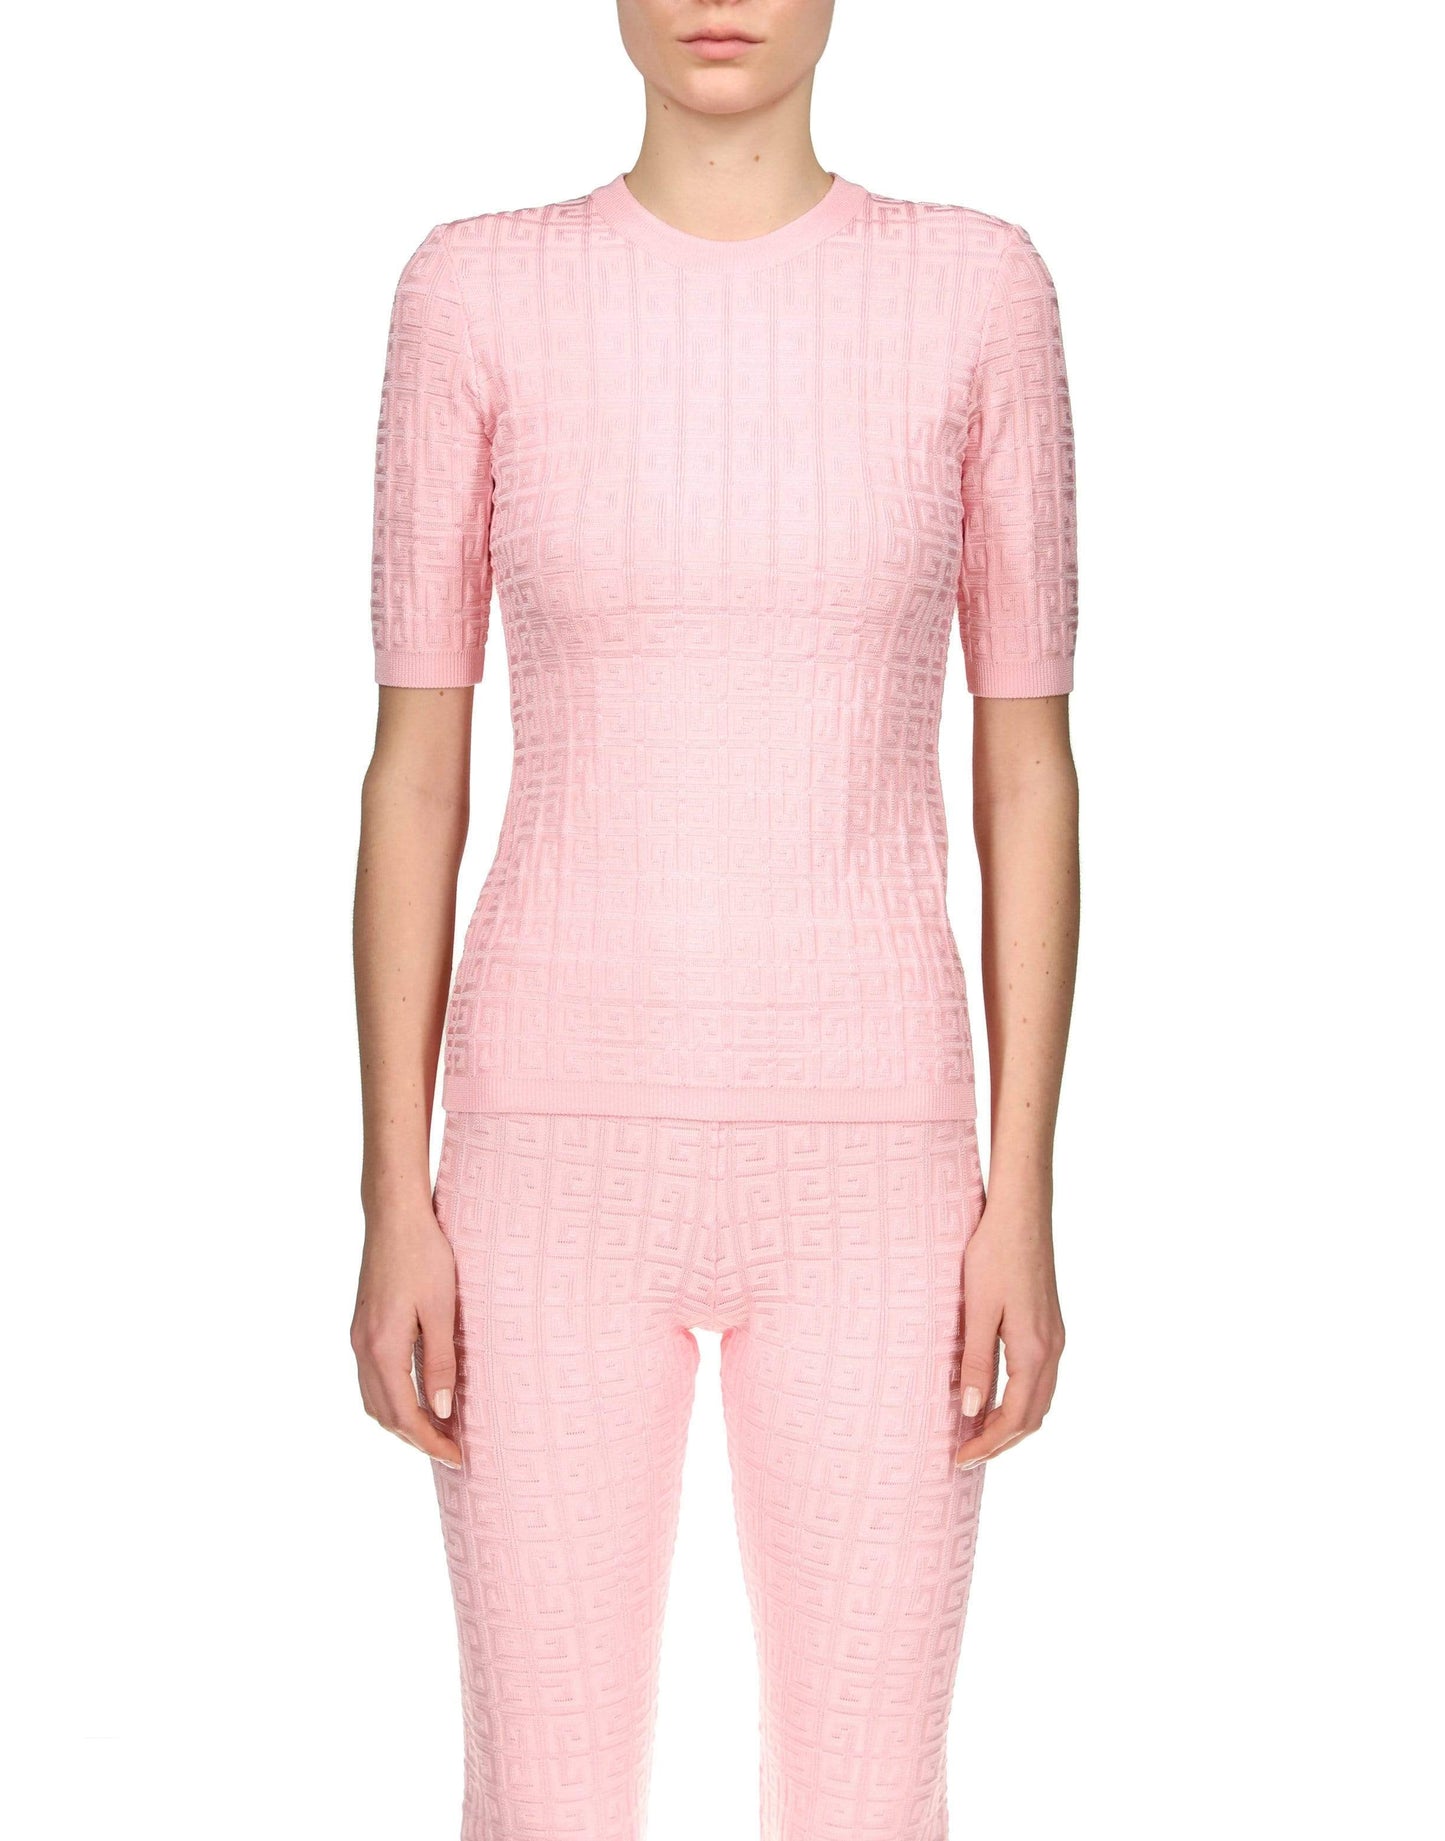 GIVENCHY-4G Light Pink Monogram Allover Sweater-